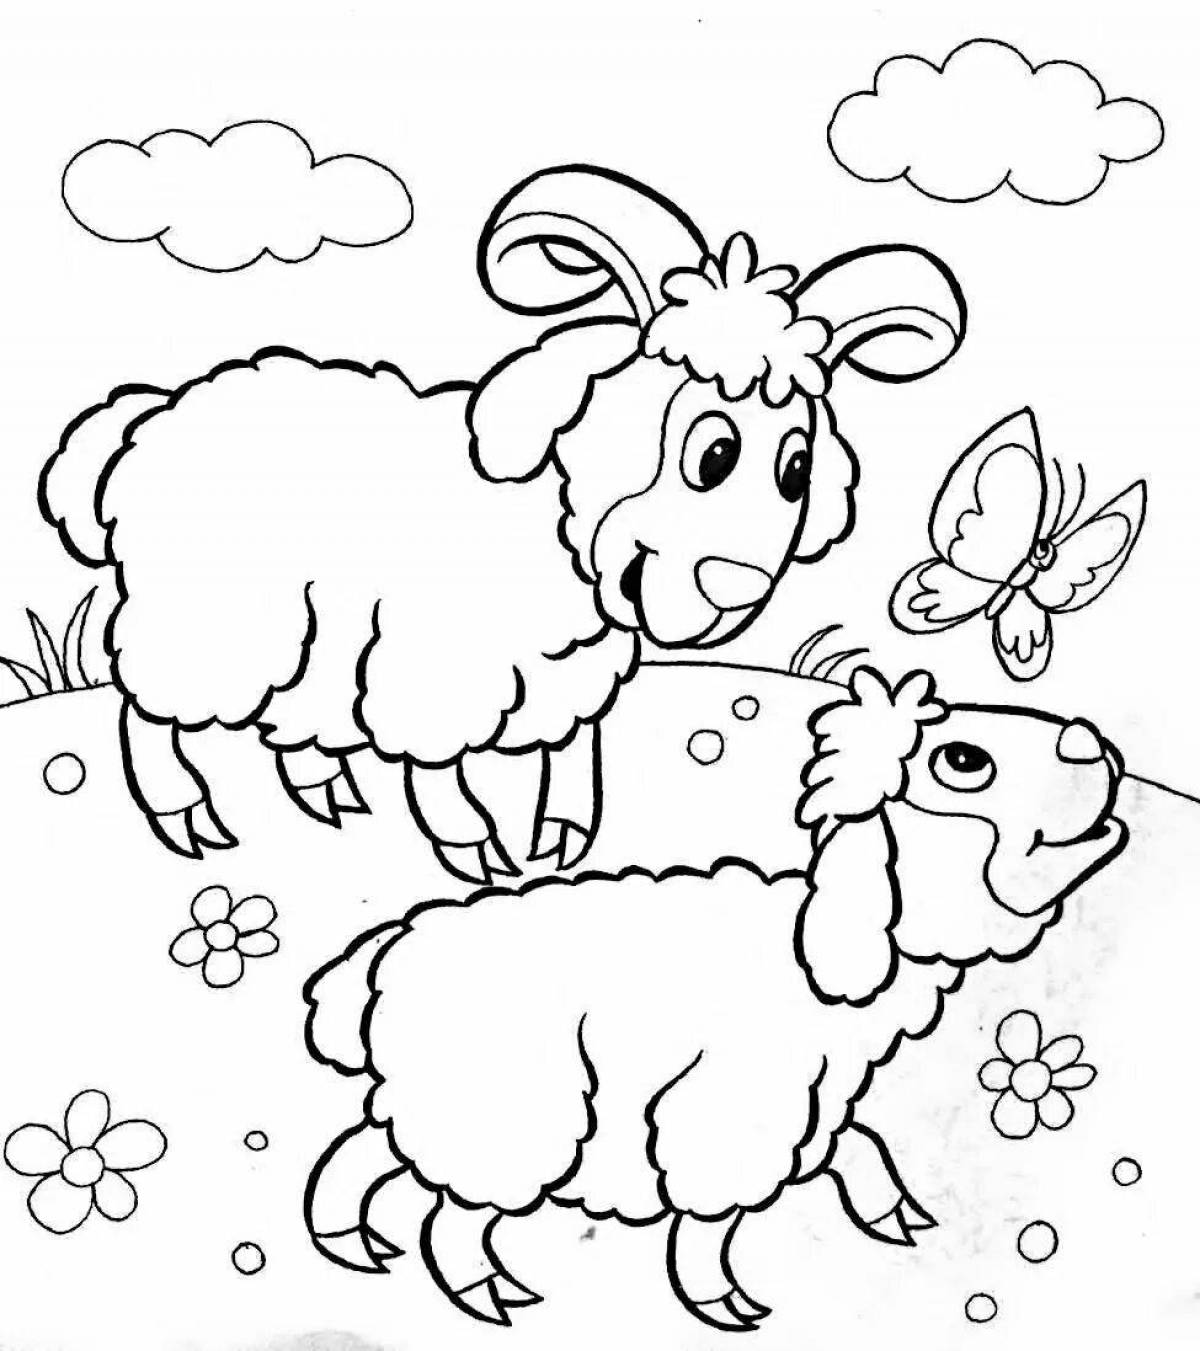 Exquisite pet coloring pages for kids